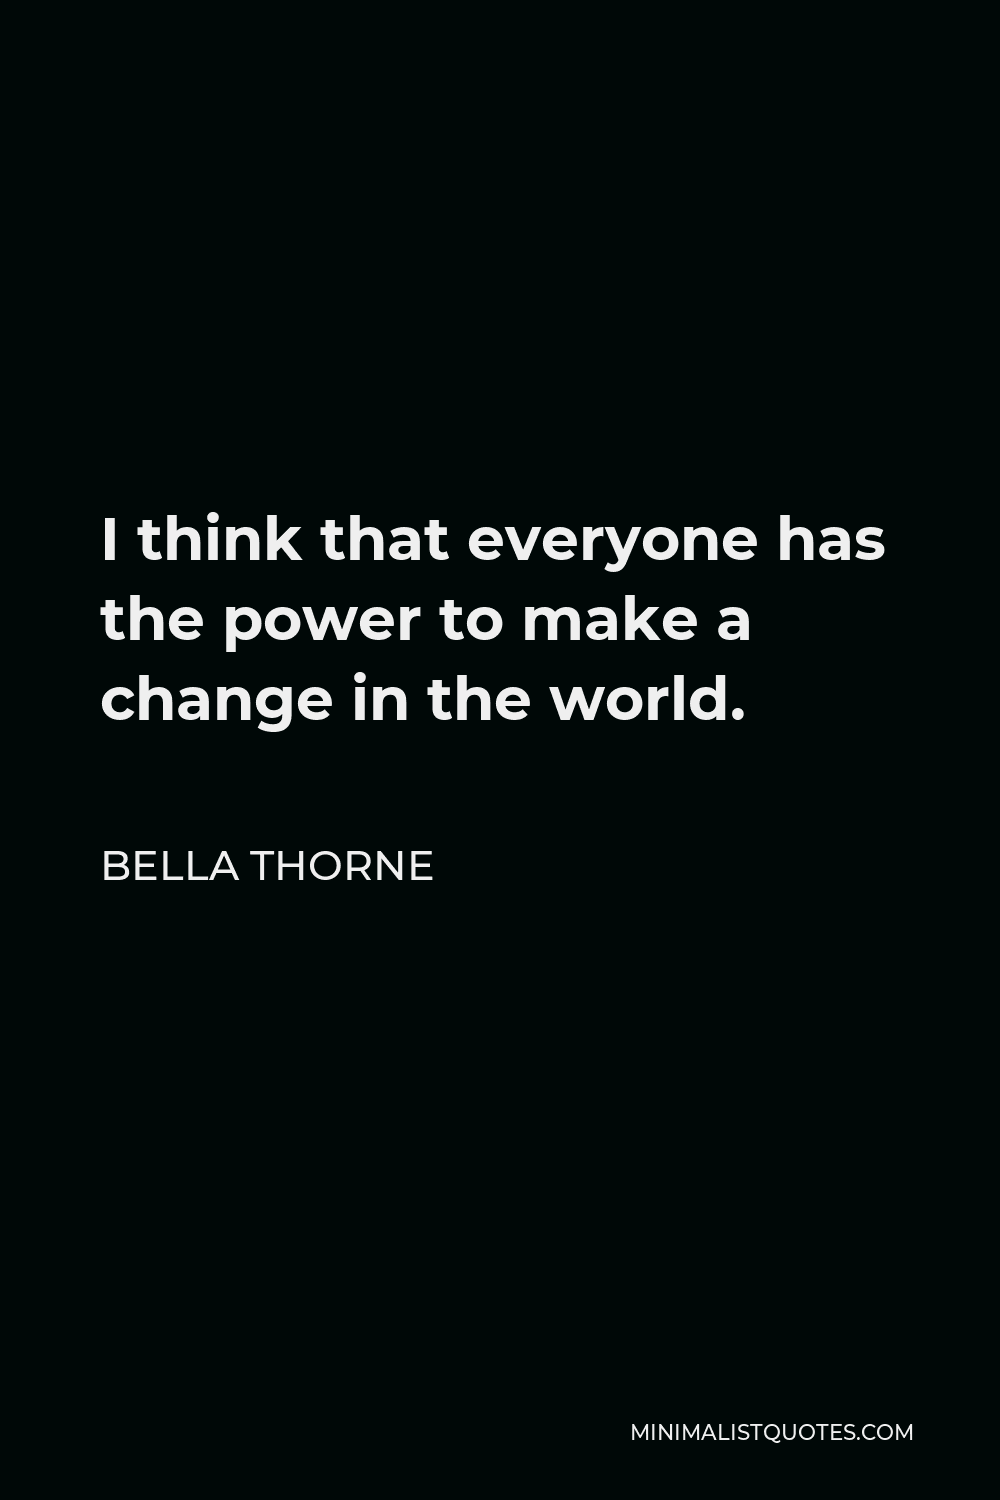 Bella Thorne Quote - I think that everyone has the power to make a change in the world.